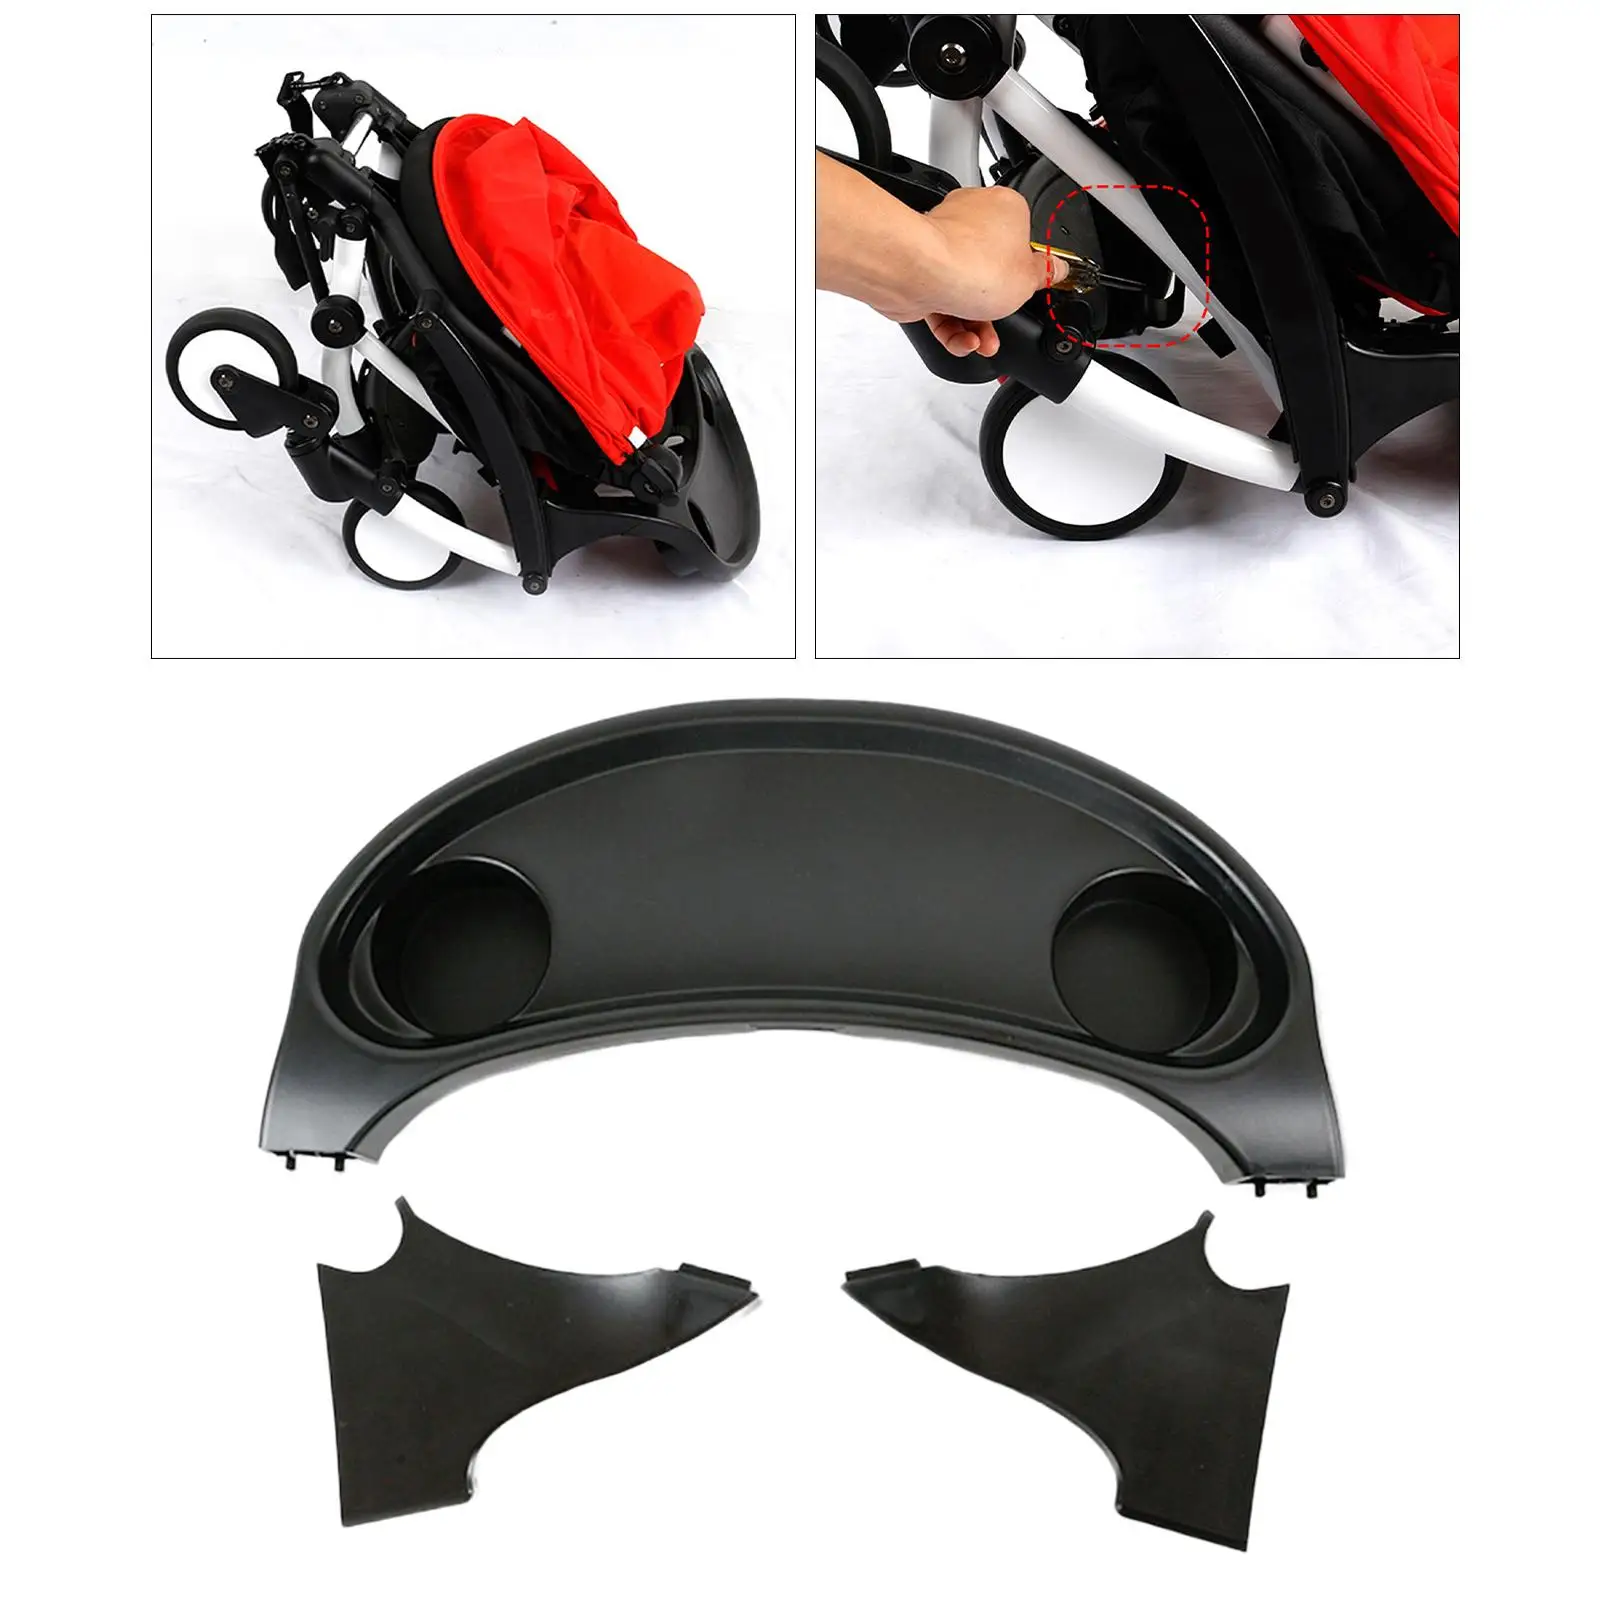 Stroller Tray Partition Storage Made of ABS Plastic Professional Easy to Install Child Tray Accessories Black for Yoyo+